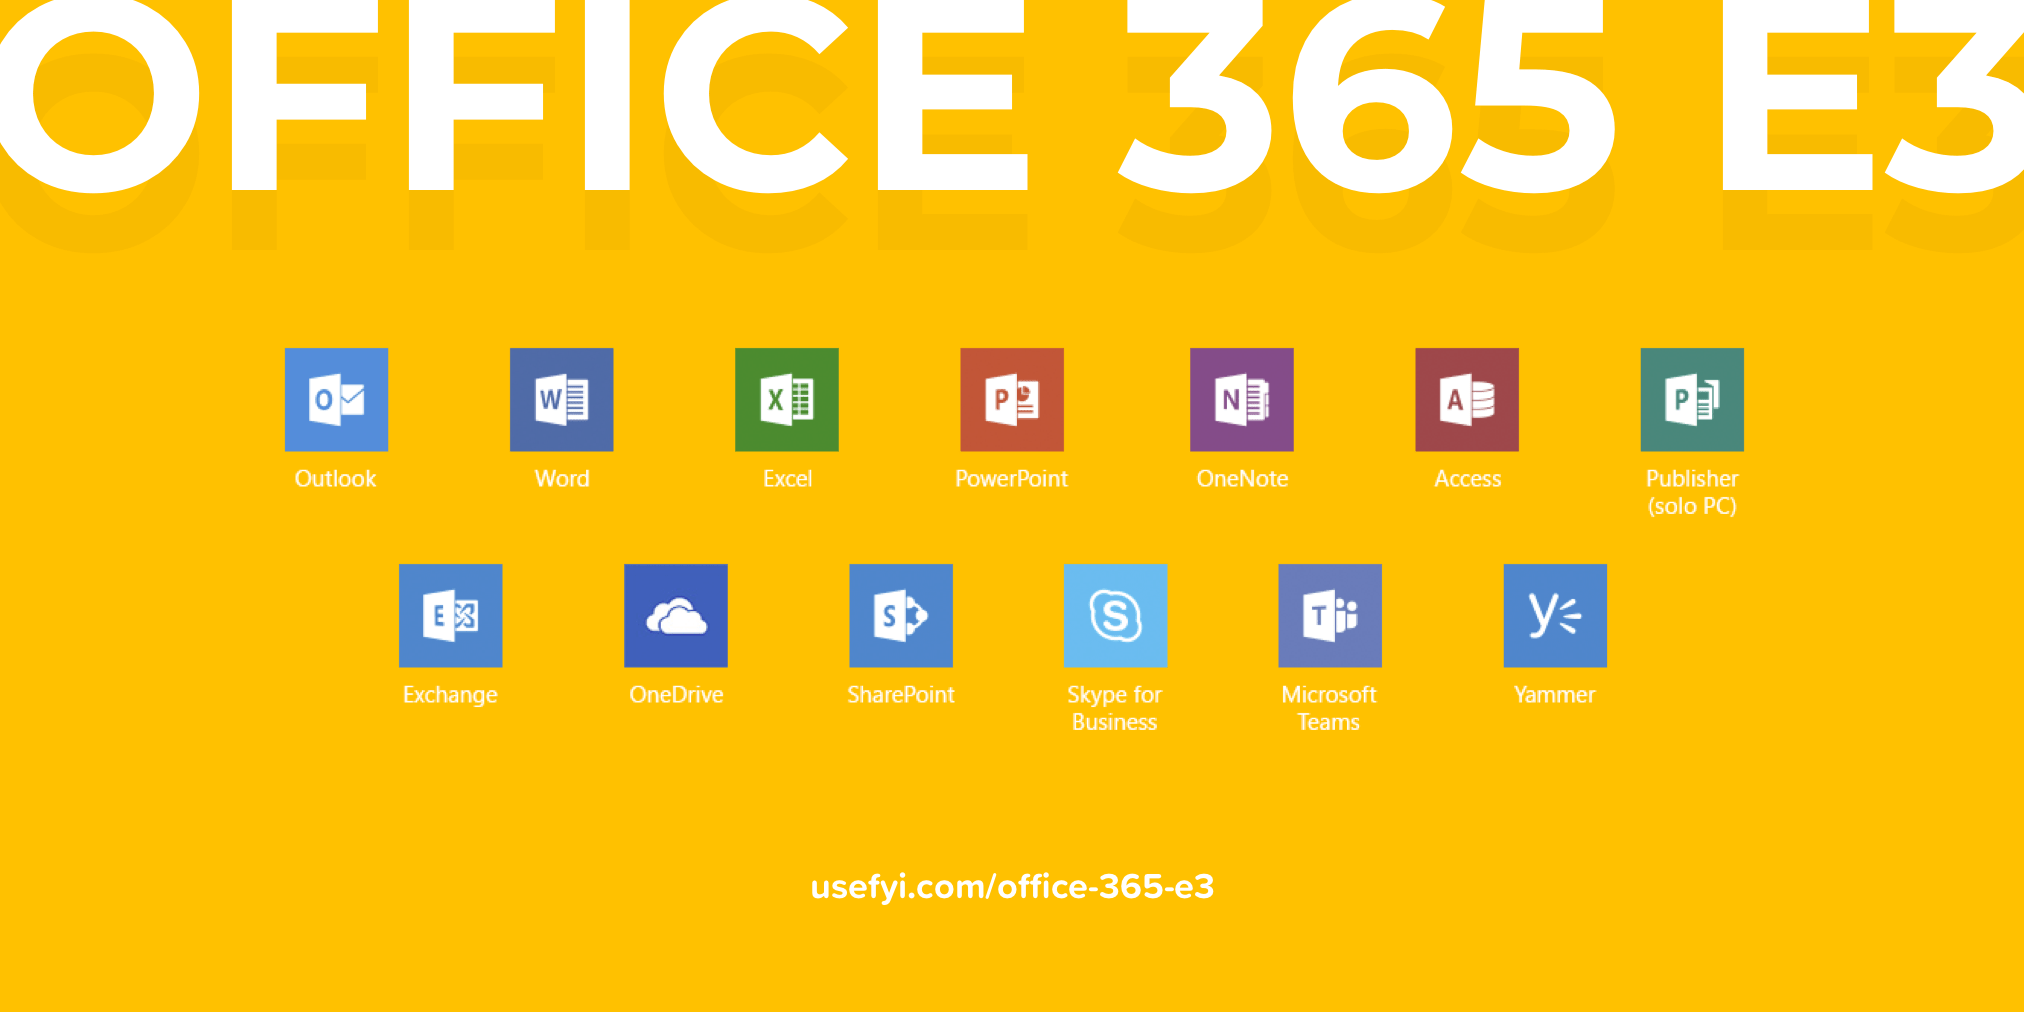 office 365 e3 plan features